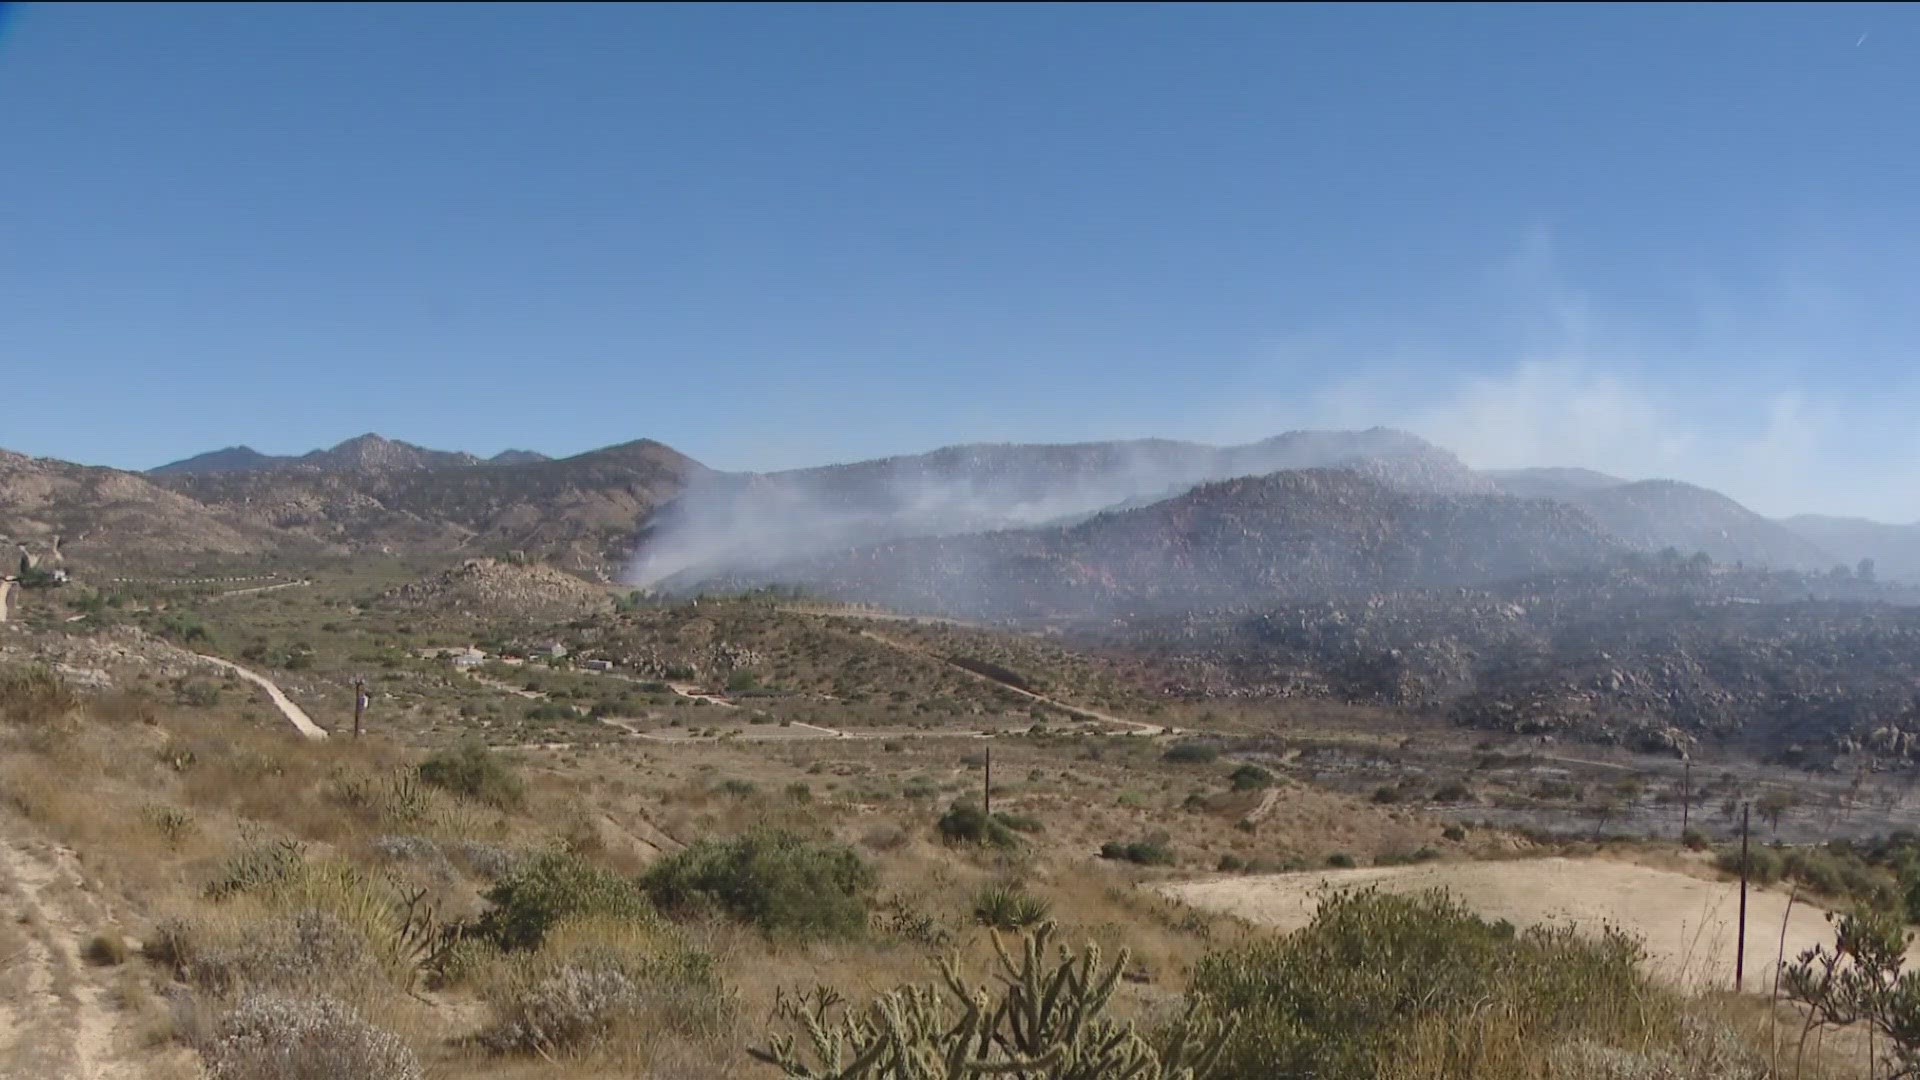 Fire officials are battling a wildfire fueled by gusty Santa Ana winds that's ripping through rural land in incorporated Riverside County.